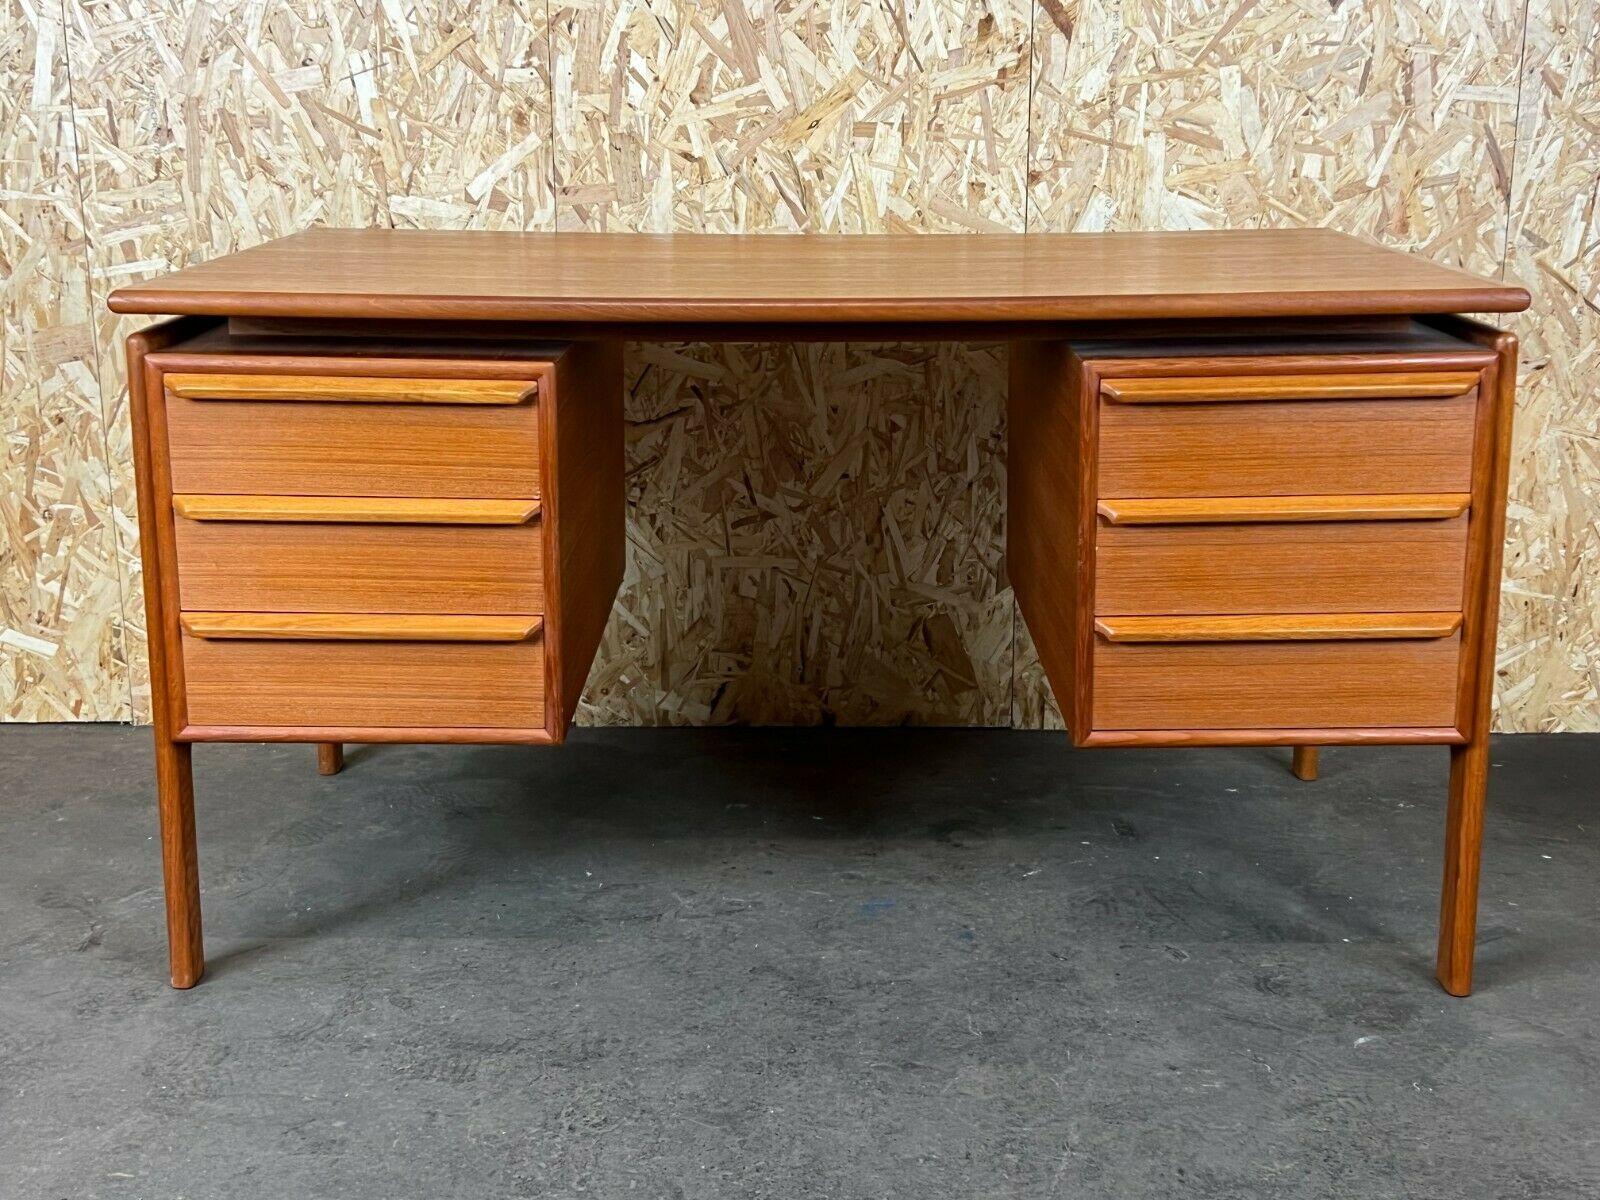 60s 70s teak writing desk by GV Gaasvig for GV Møbler 60s

Object: Writing Desk

Manufacturer: GV Moebler

Condition: good - vintage

Age: around 1960-1970

Dimensions:

130cm x 75cm x 71cm

Other notes:

The pictures serve as part